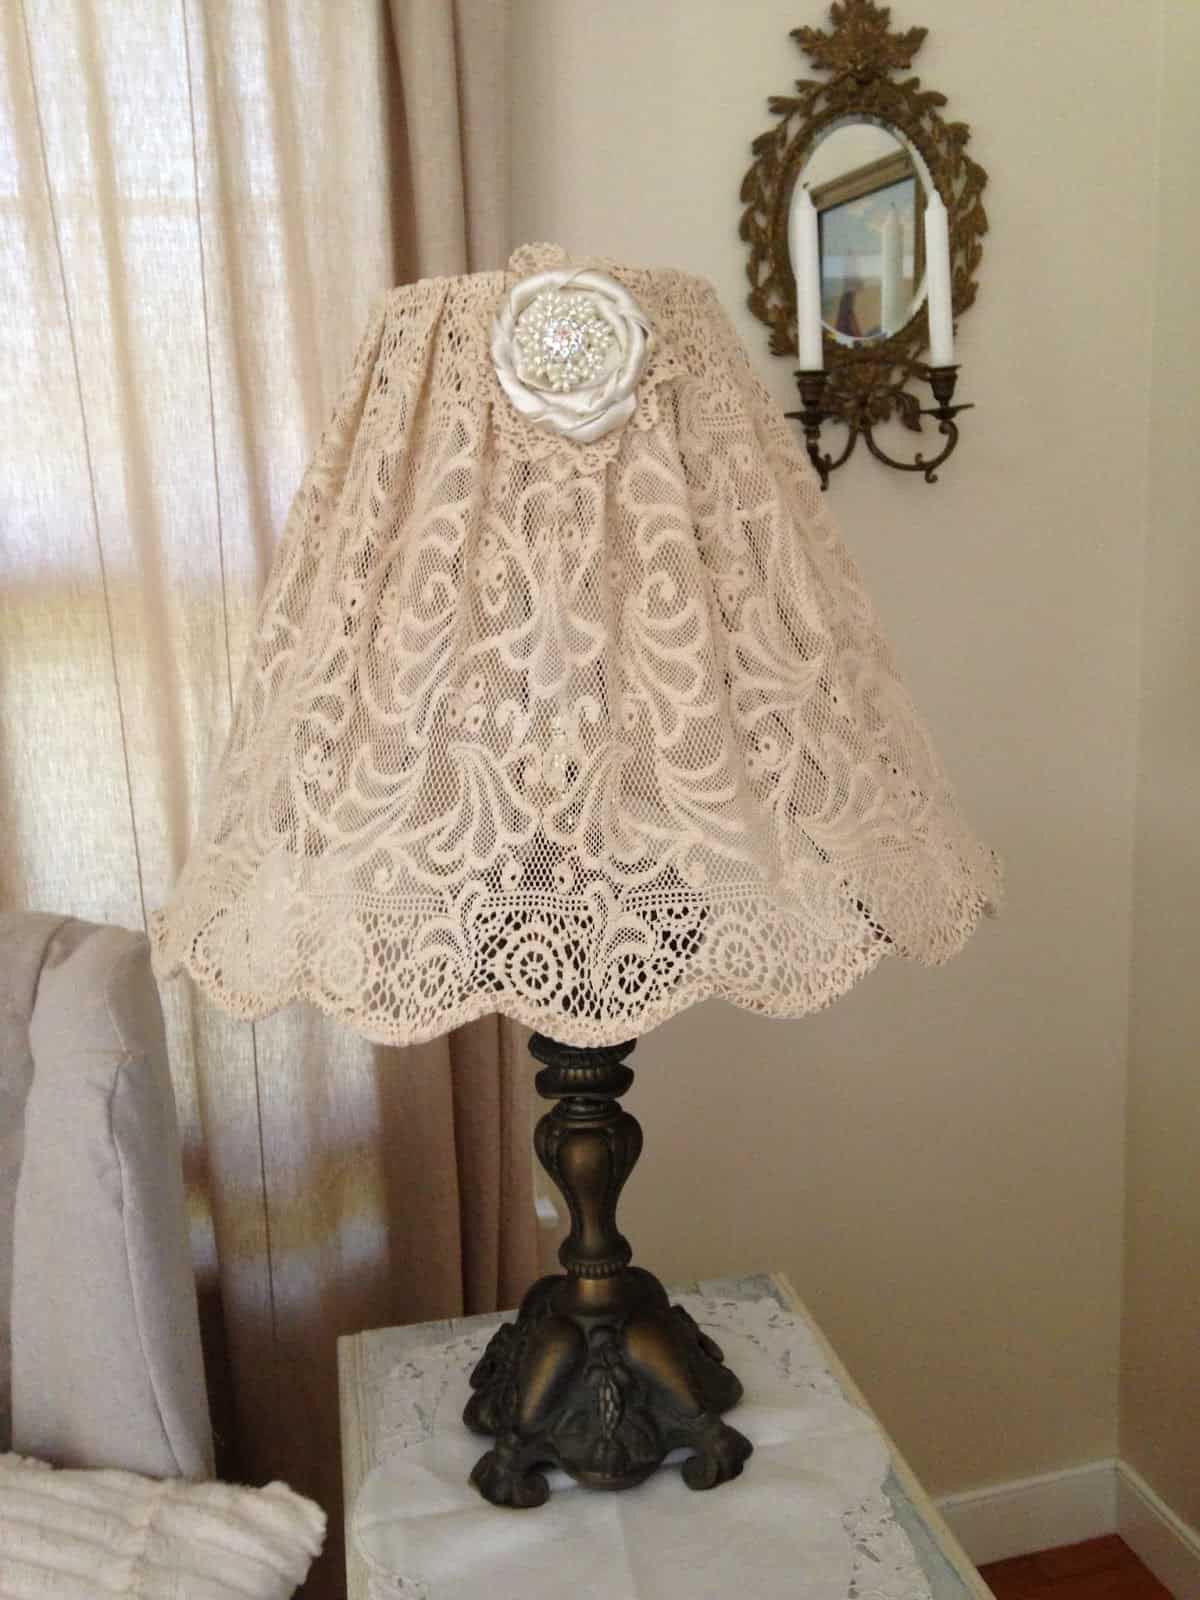 Lampshade from an antique lace tablecloth